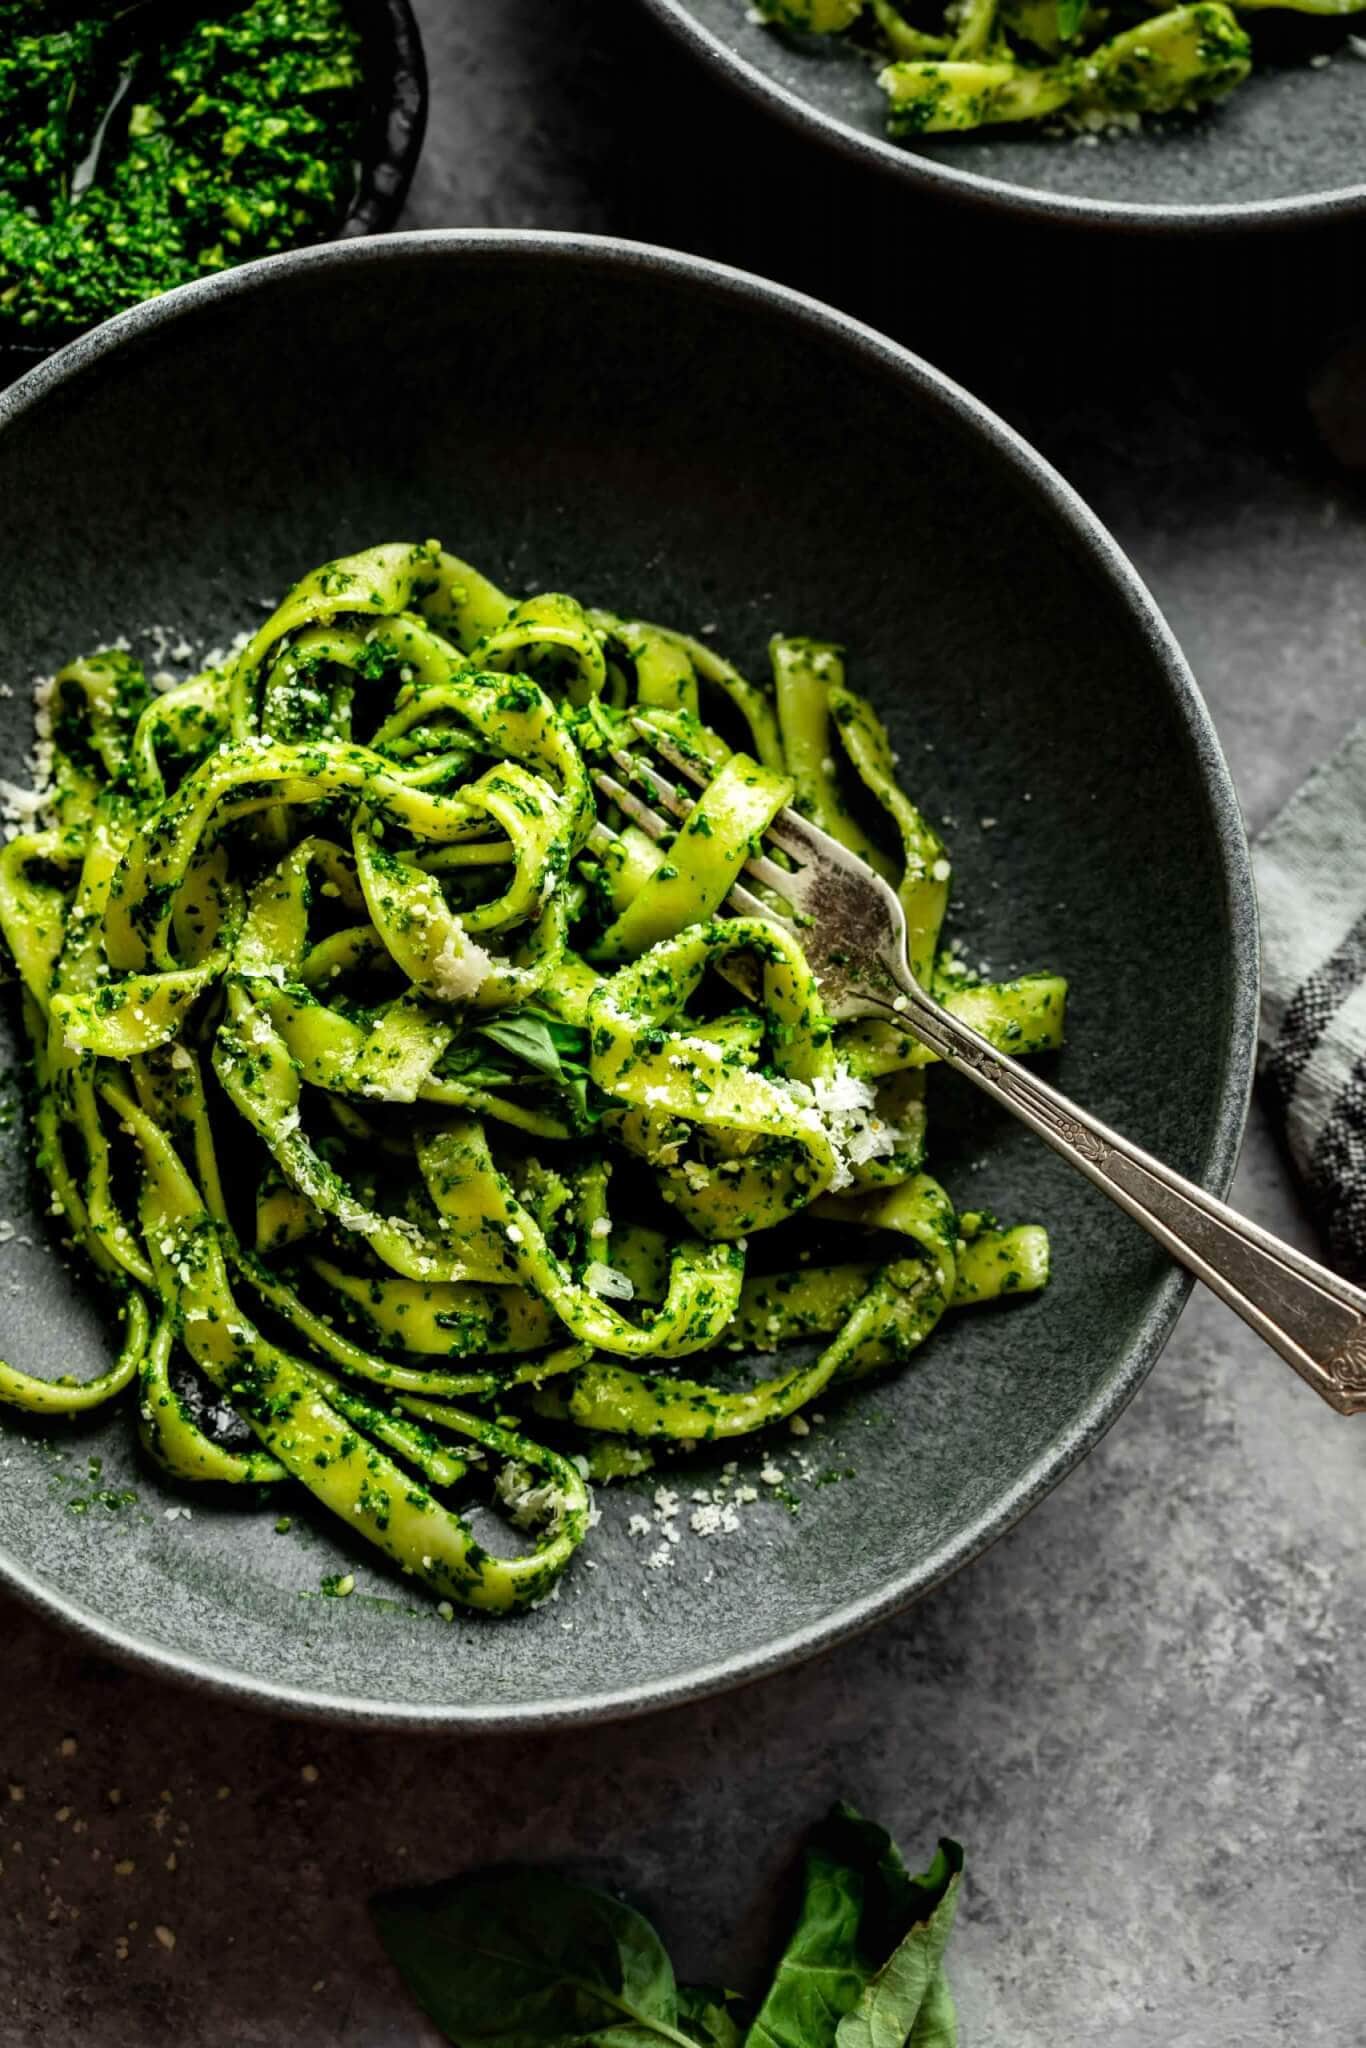 KALE PESTO TOSSED WITH PASTA AND SERVED IN DARK GREY BOWL WITH FORK.